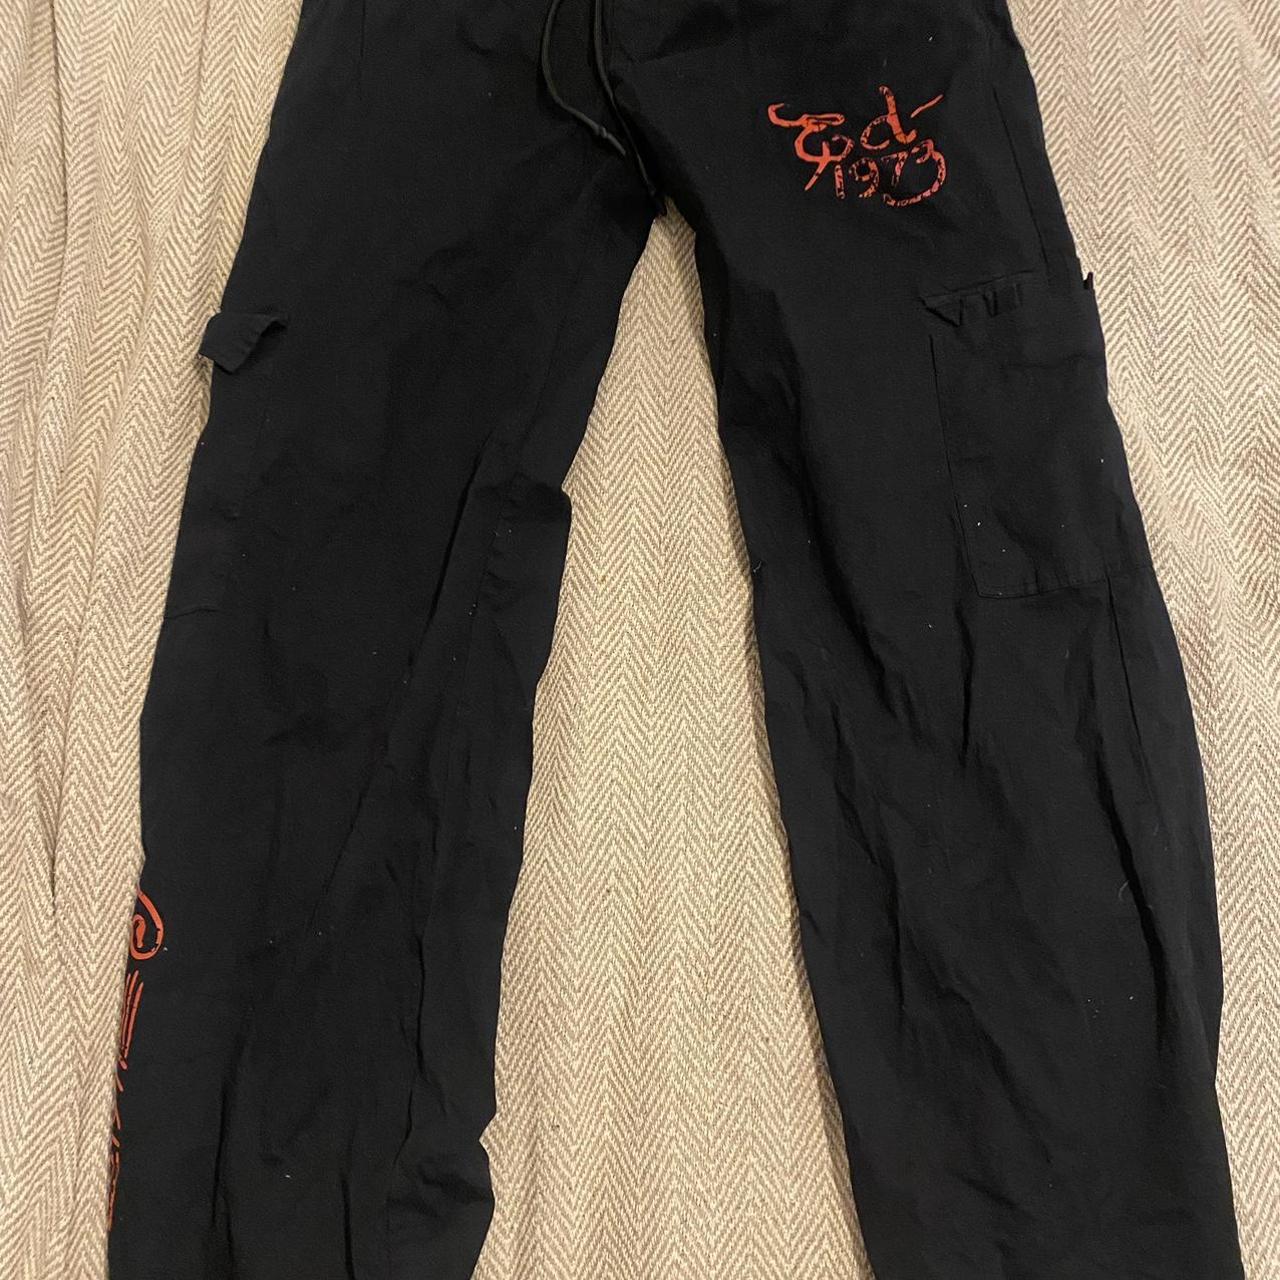 size medium ed hardy cargos from urban outfitters... - Depop